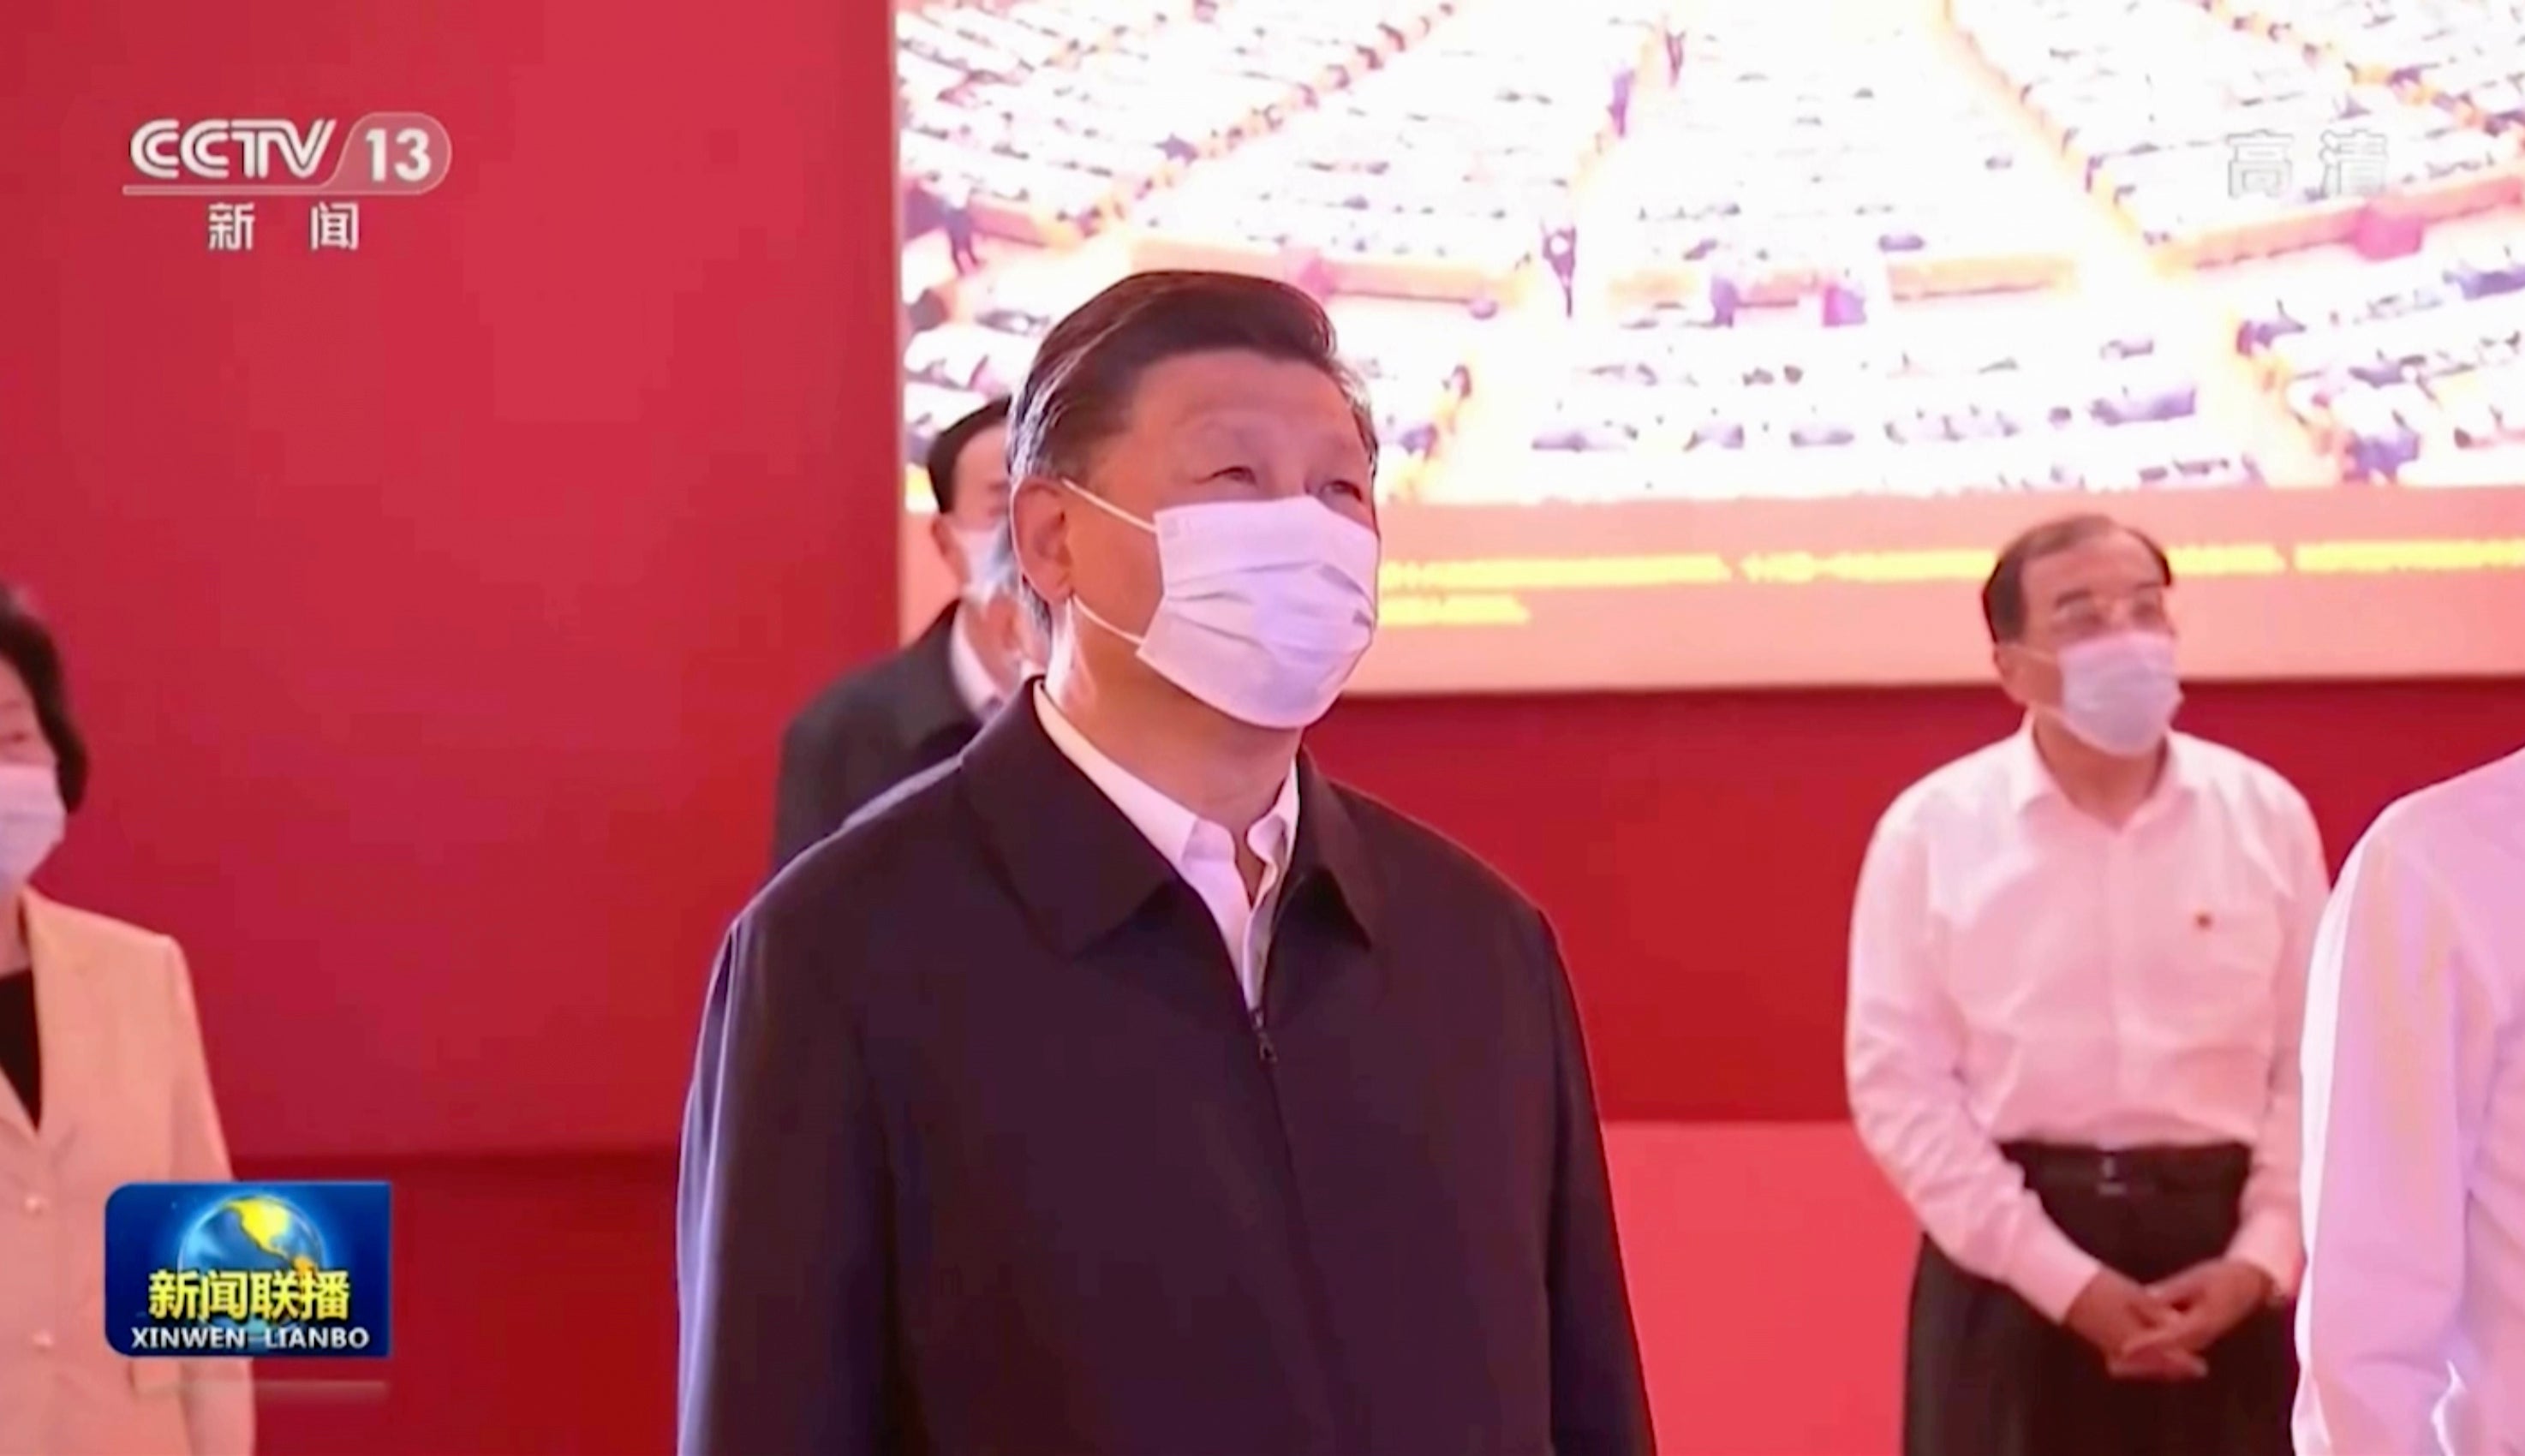 In this image taken from video footage run by China's CCTV, Chinese President Xi Jinping and other Chinese leaders visit an exhibit with the theme of "Forging Ahead into the New Era" at the Beijing Exhibition Hall on Tuesday, 27 September 2022